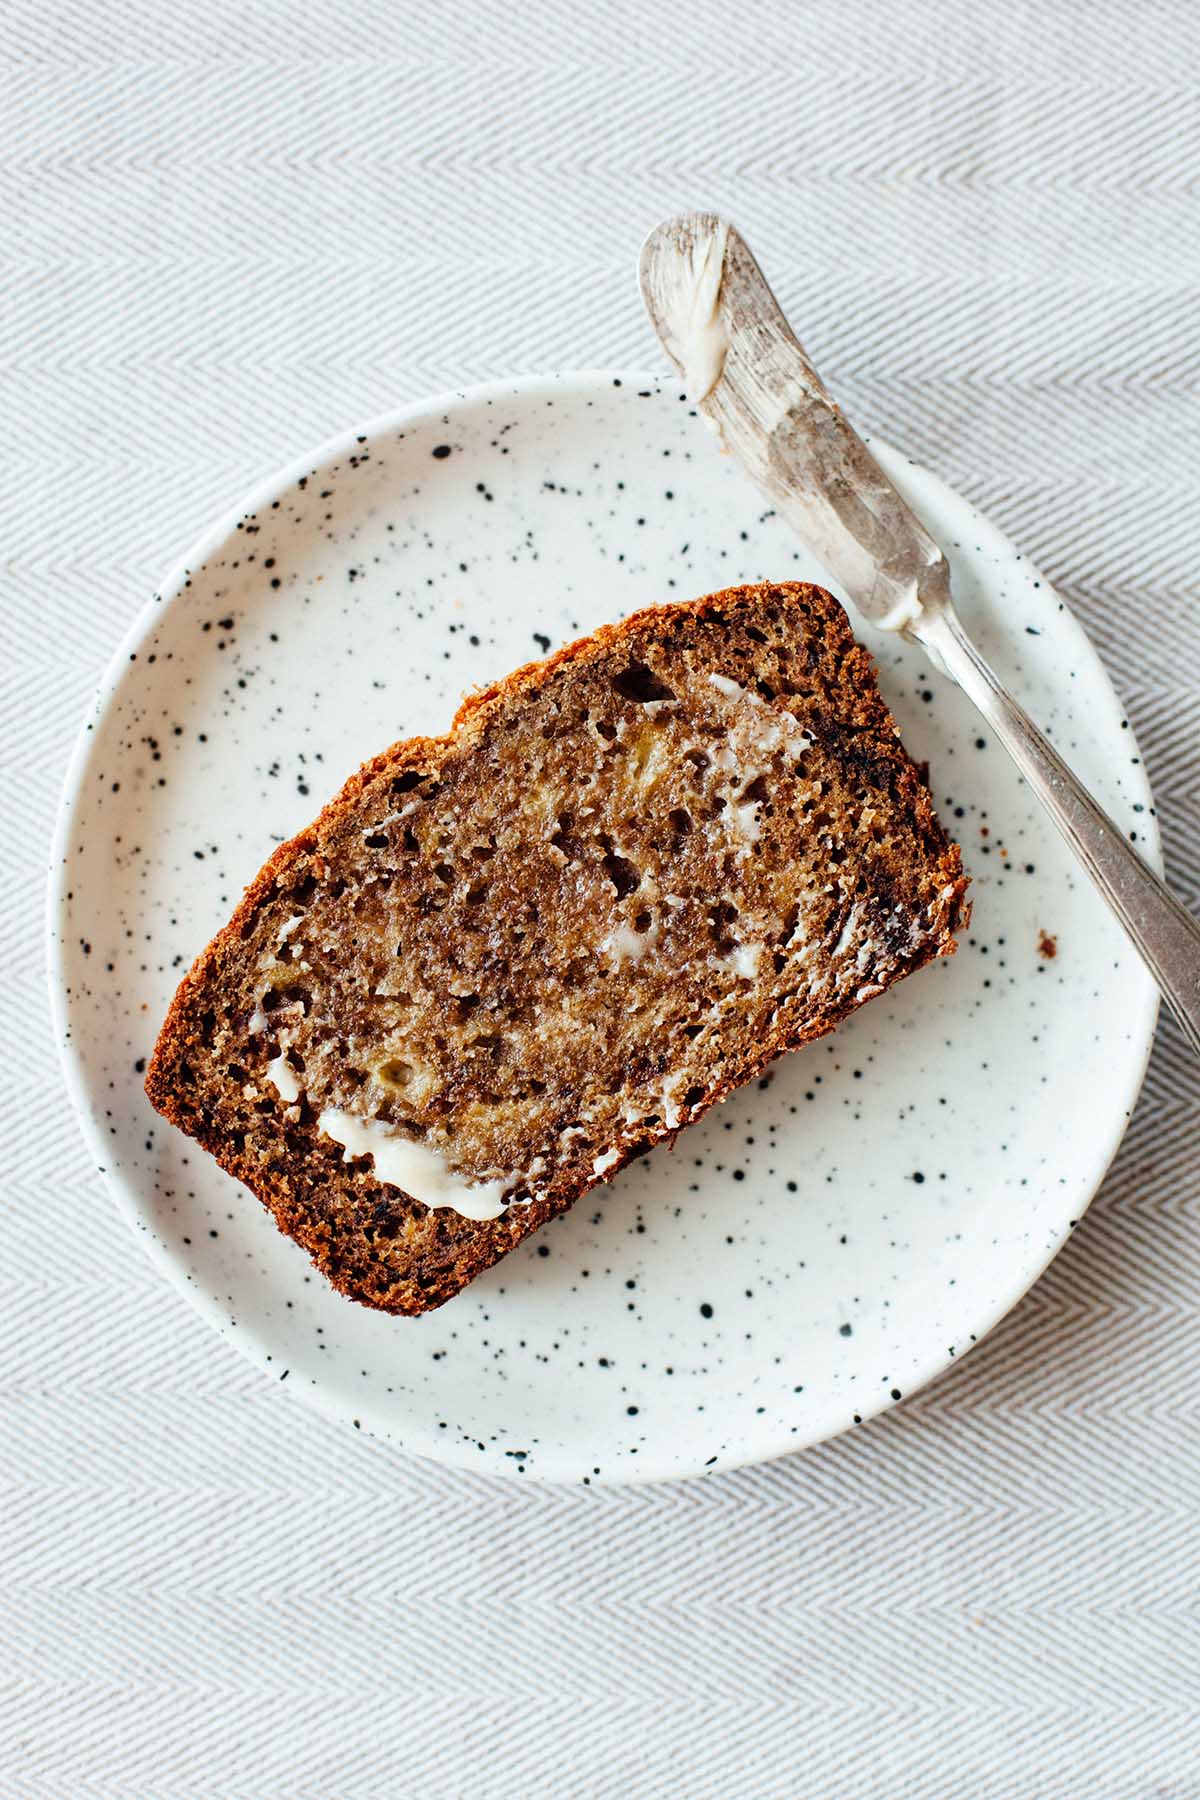 A slice of buttered banana bread on a small white speckled plate.